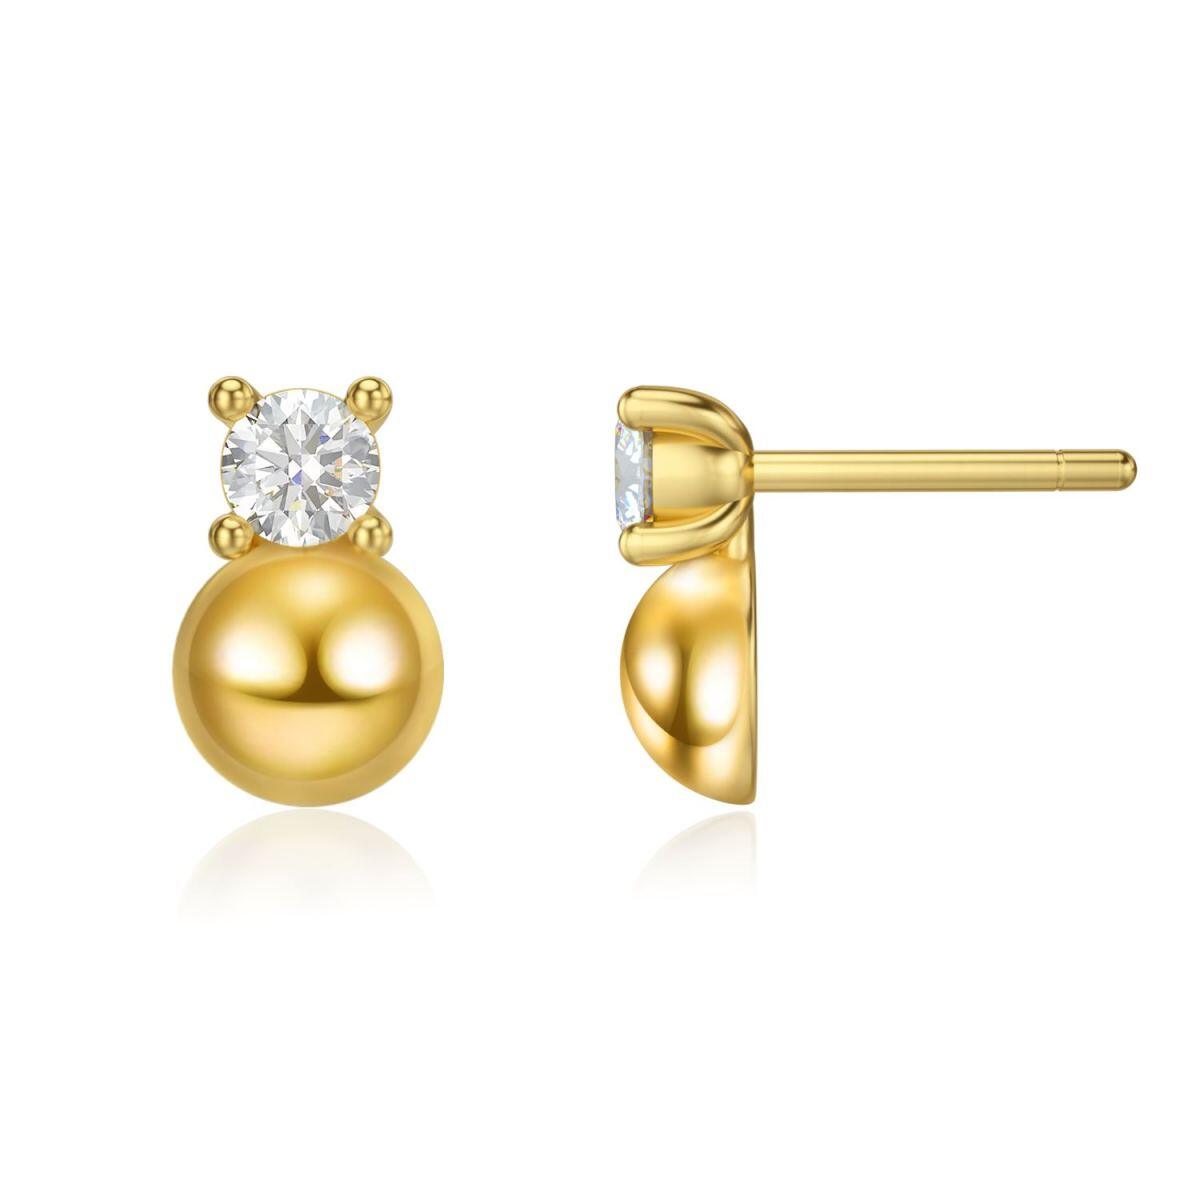 14K Gold Round Crystal Round Stud Earrings-1